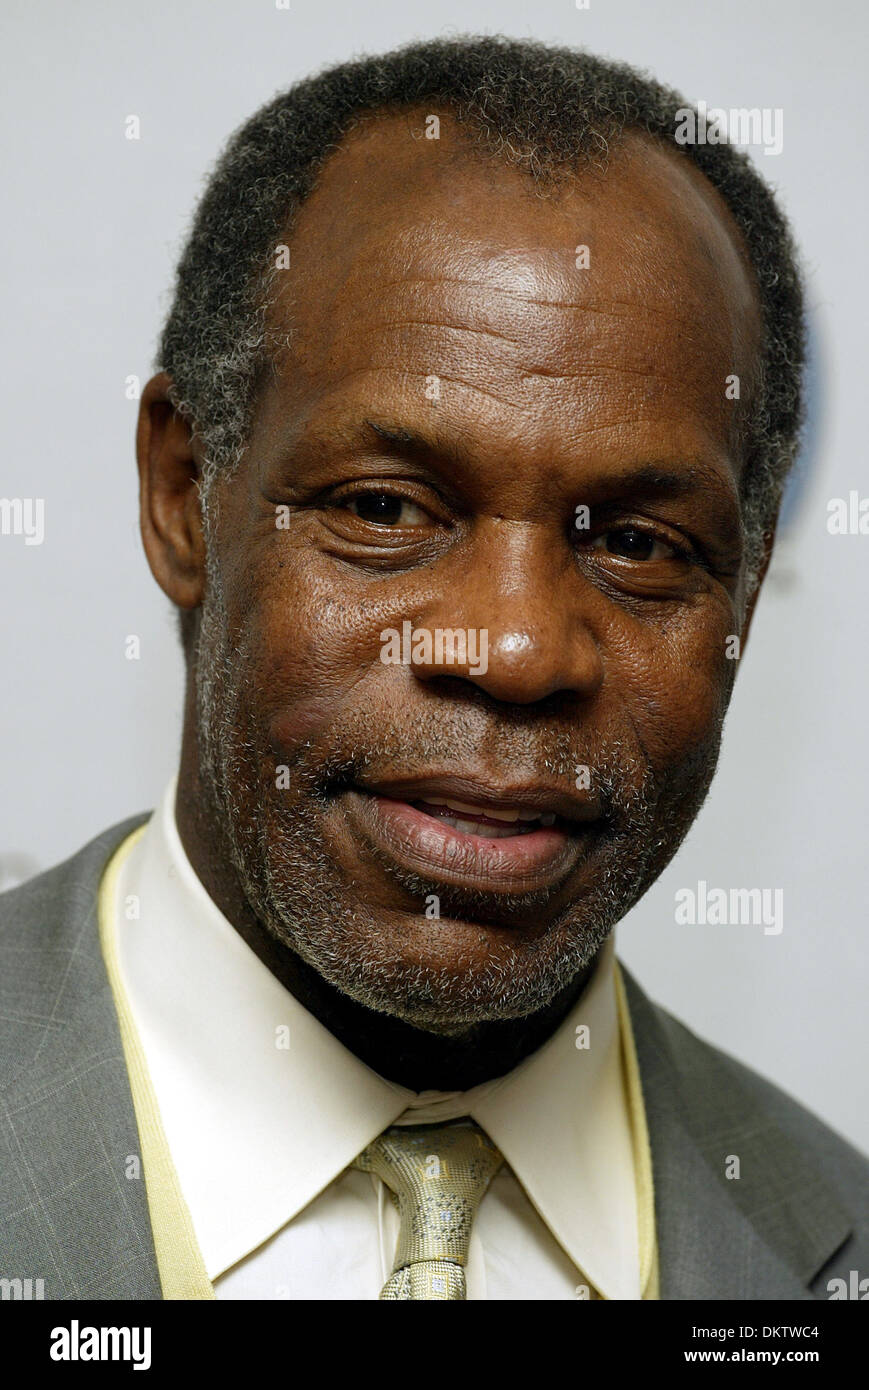 DANNY GLOVER.ACTOR. BEVERLY HILLS, USA.REGENT BEVERLY WILSHIRE HOTEL.28/10/2002.LAC10507. Stock Photo